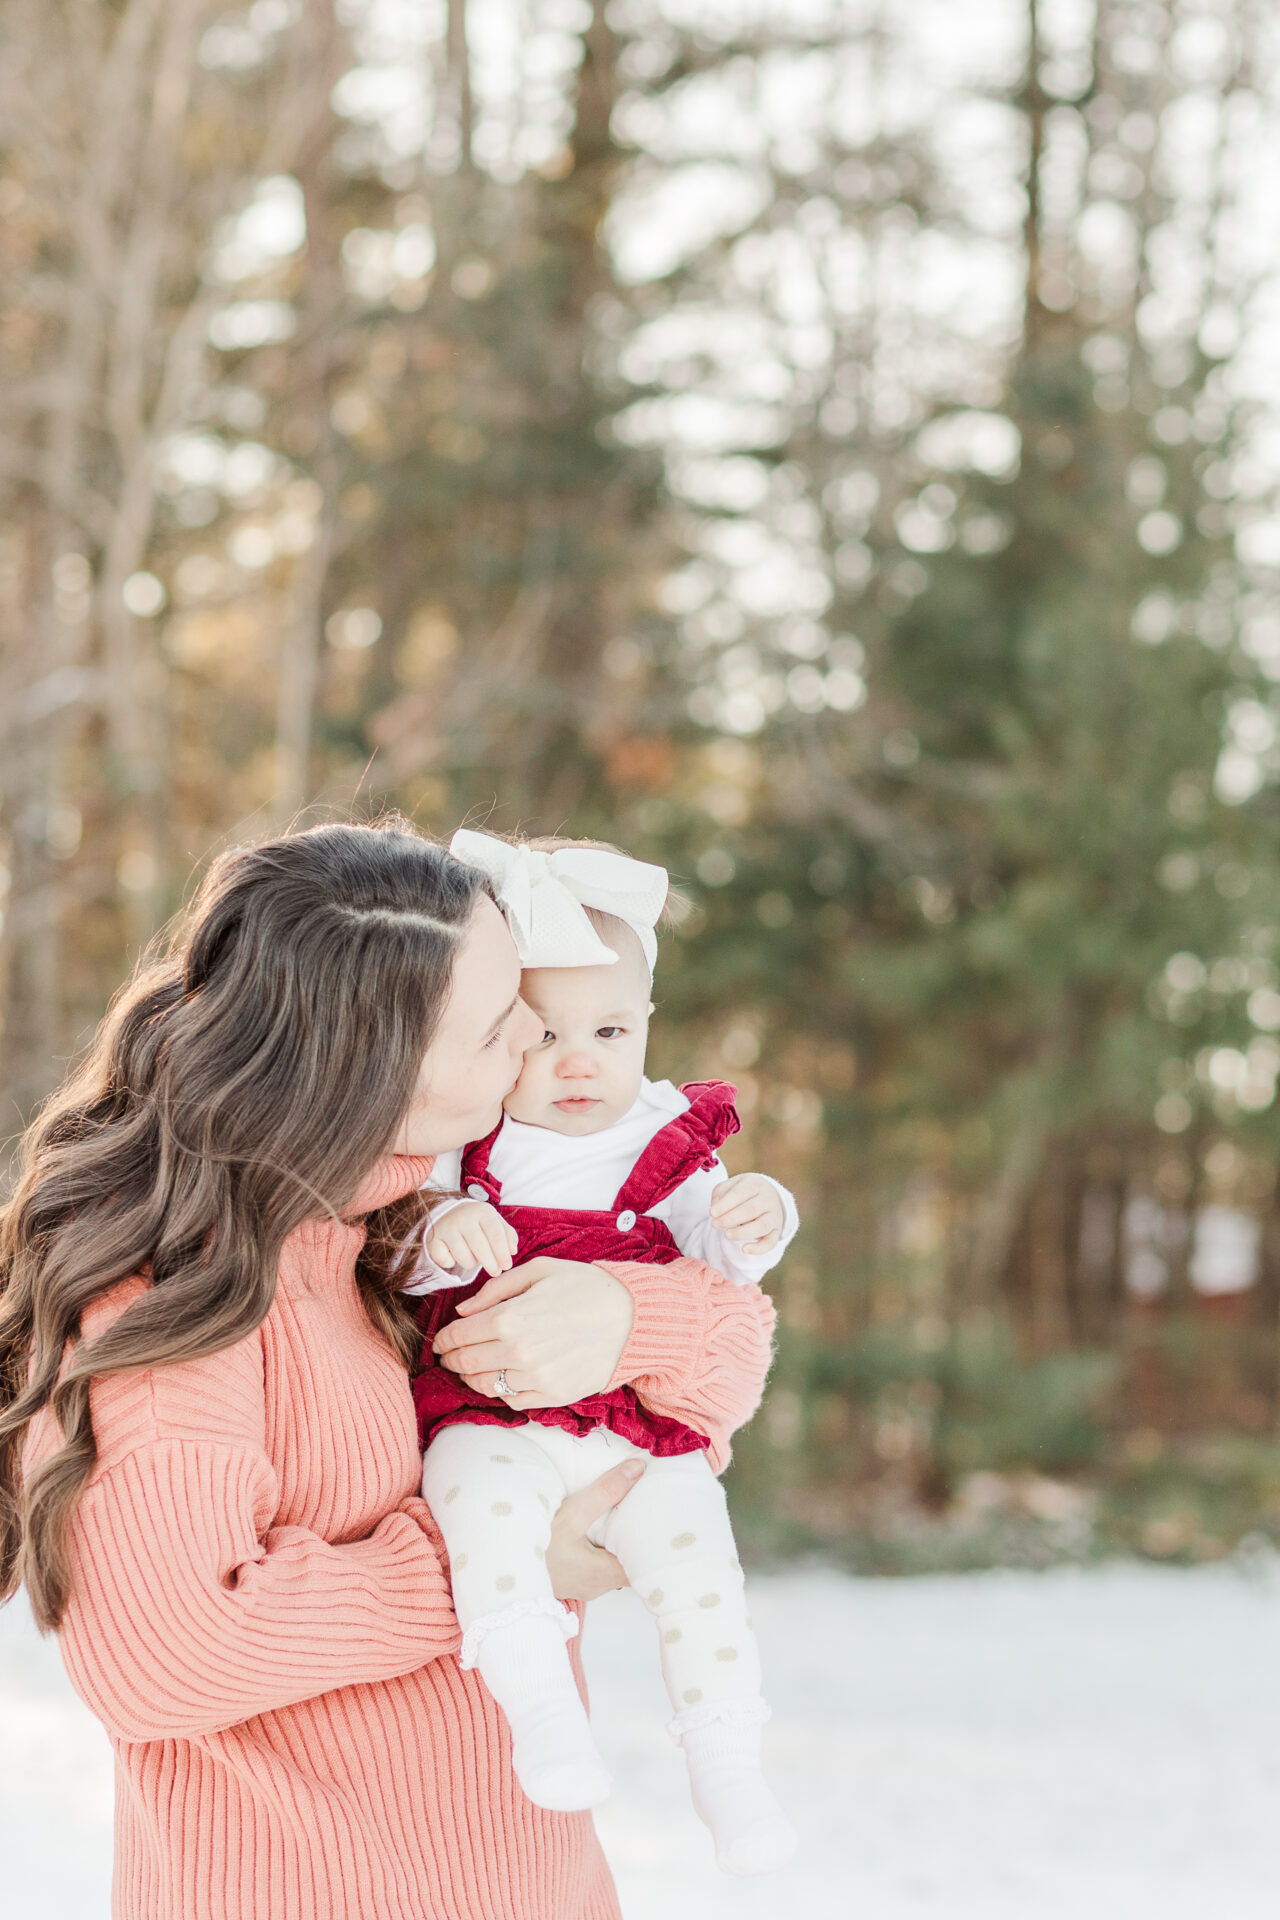 cold weather photo session tips with Sara Sniderman Photography